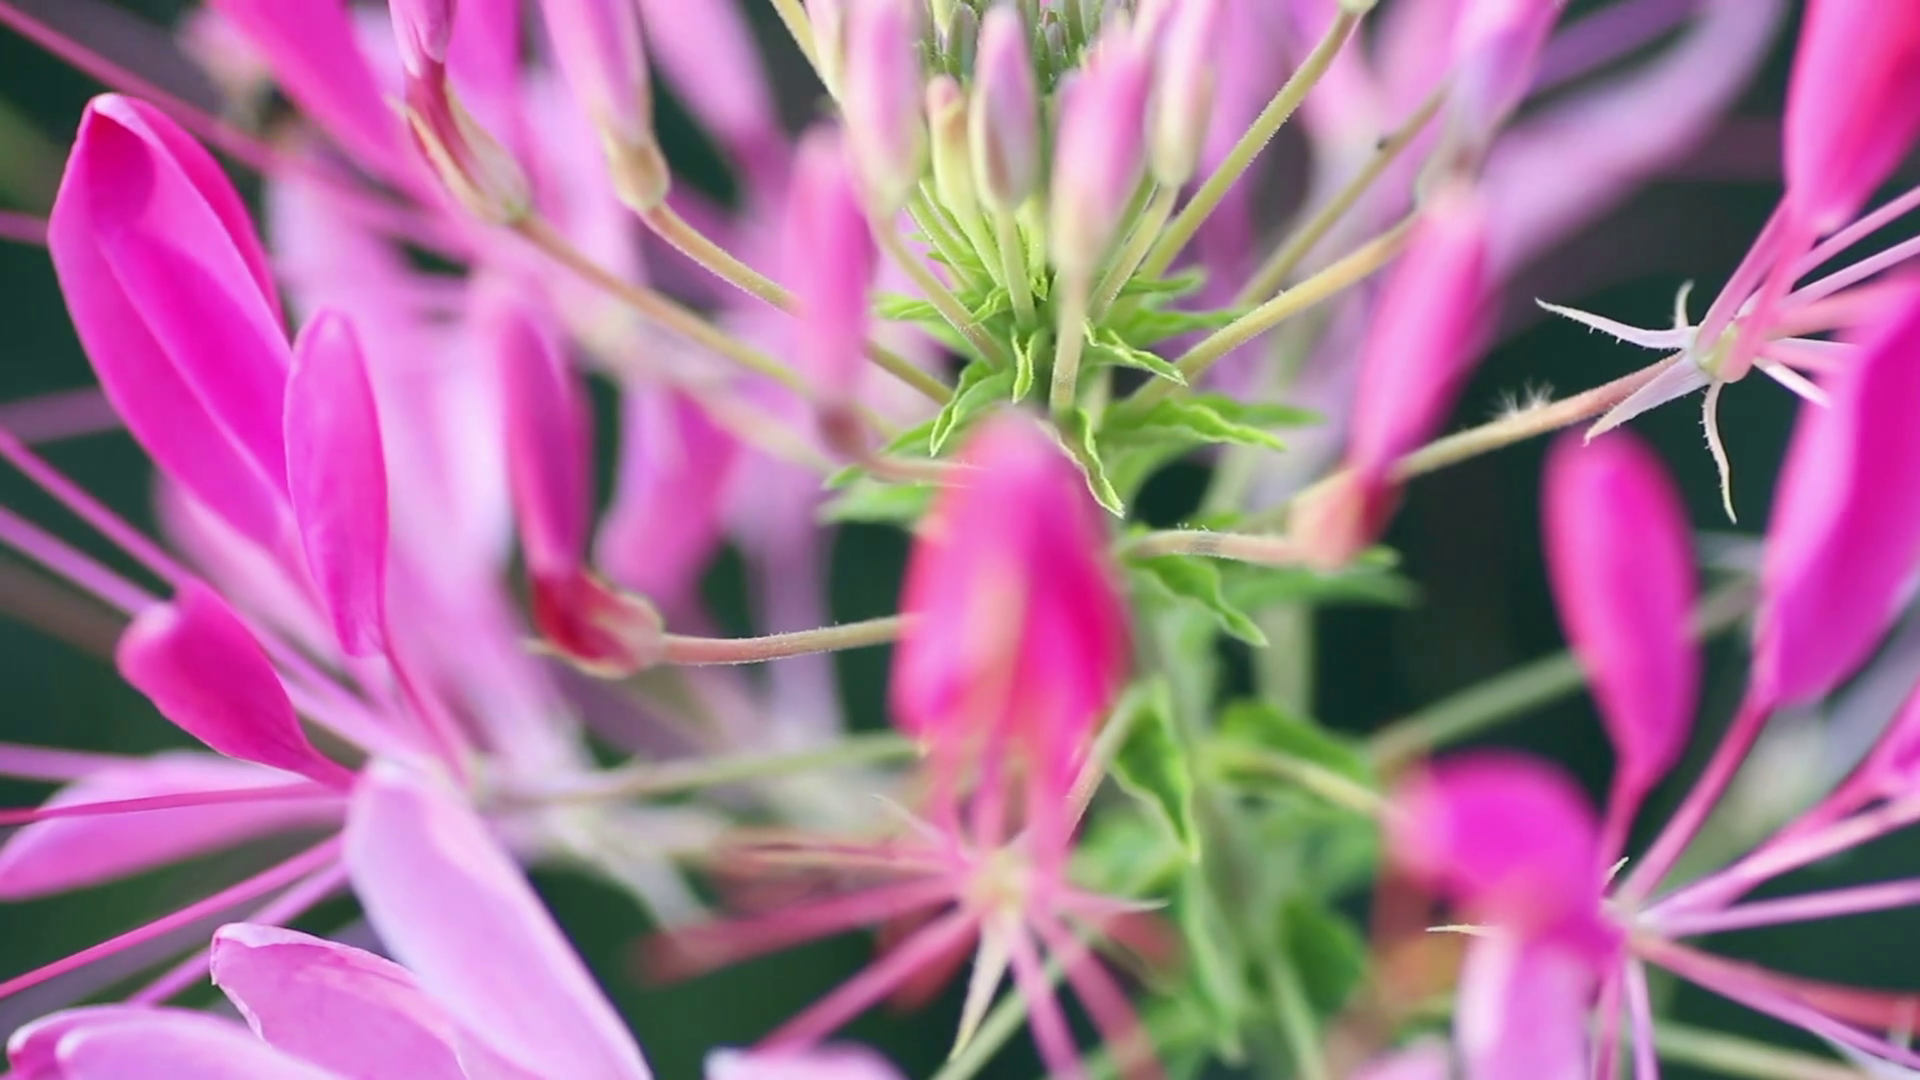 Spider flower (Cleome hassleriana) with white and pink petals and ...